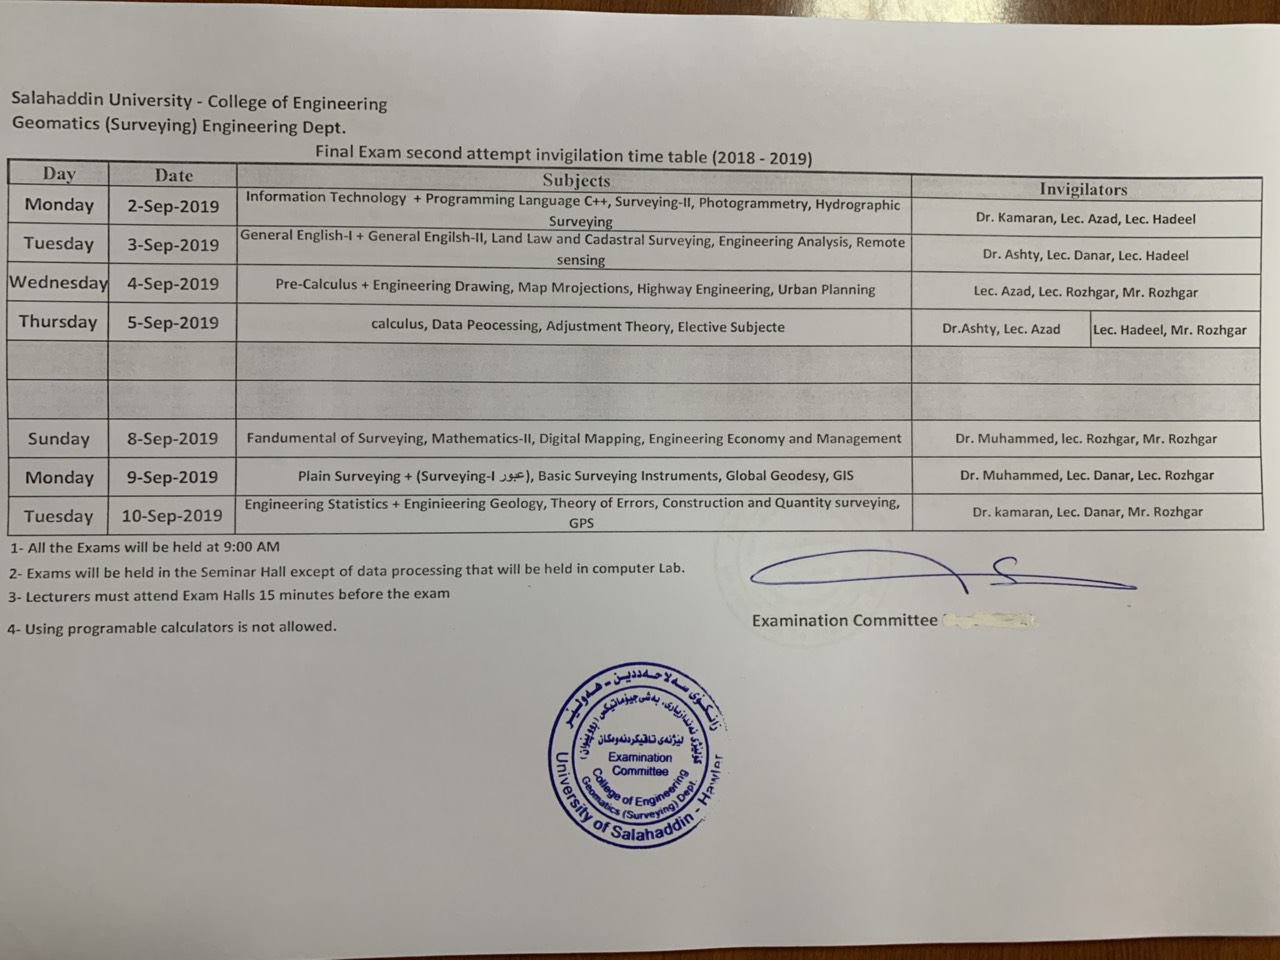 http://colleges.su.edu.krd/engineering/wp-content/uploads/2019/08/Final-Exam-second-attempt-invigilation-time-table-2018-2019.jpg